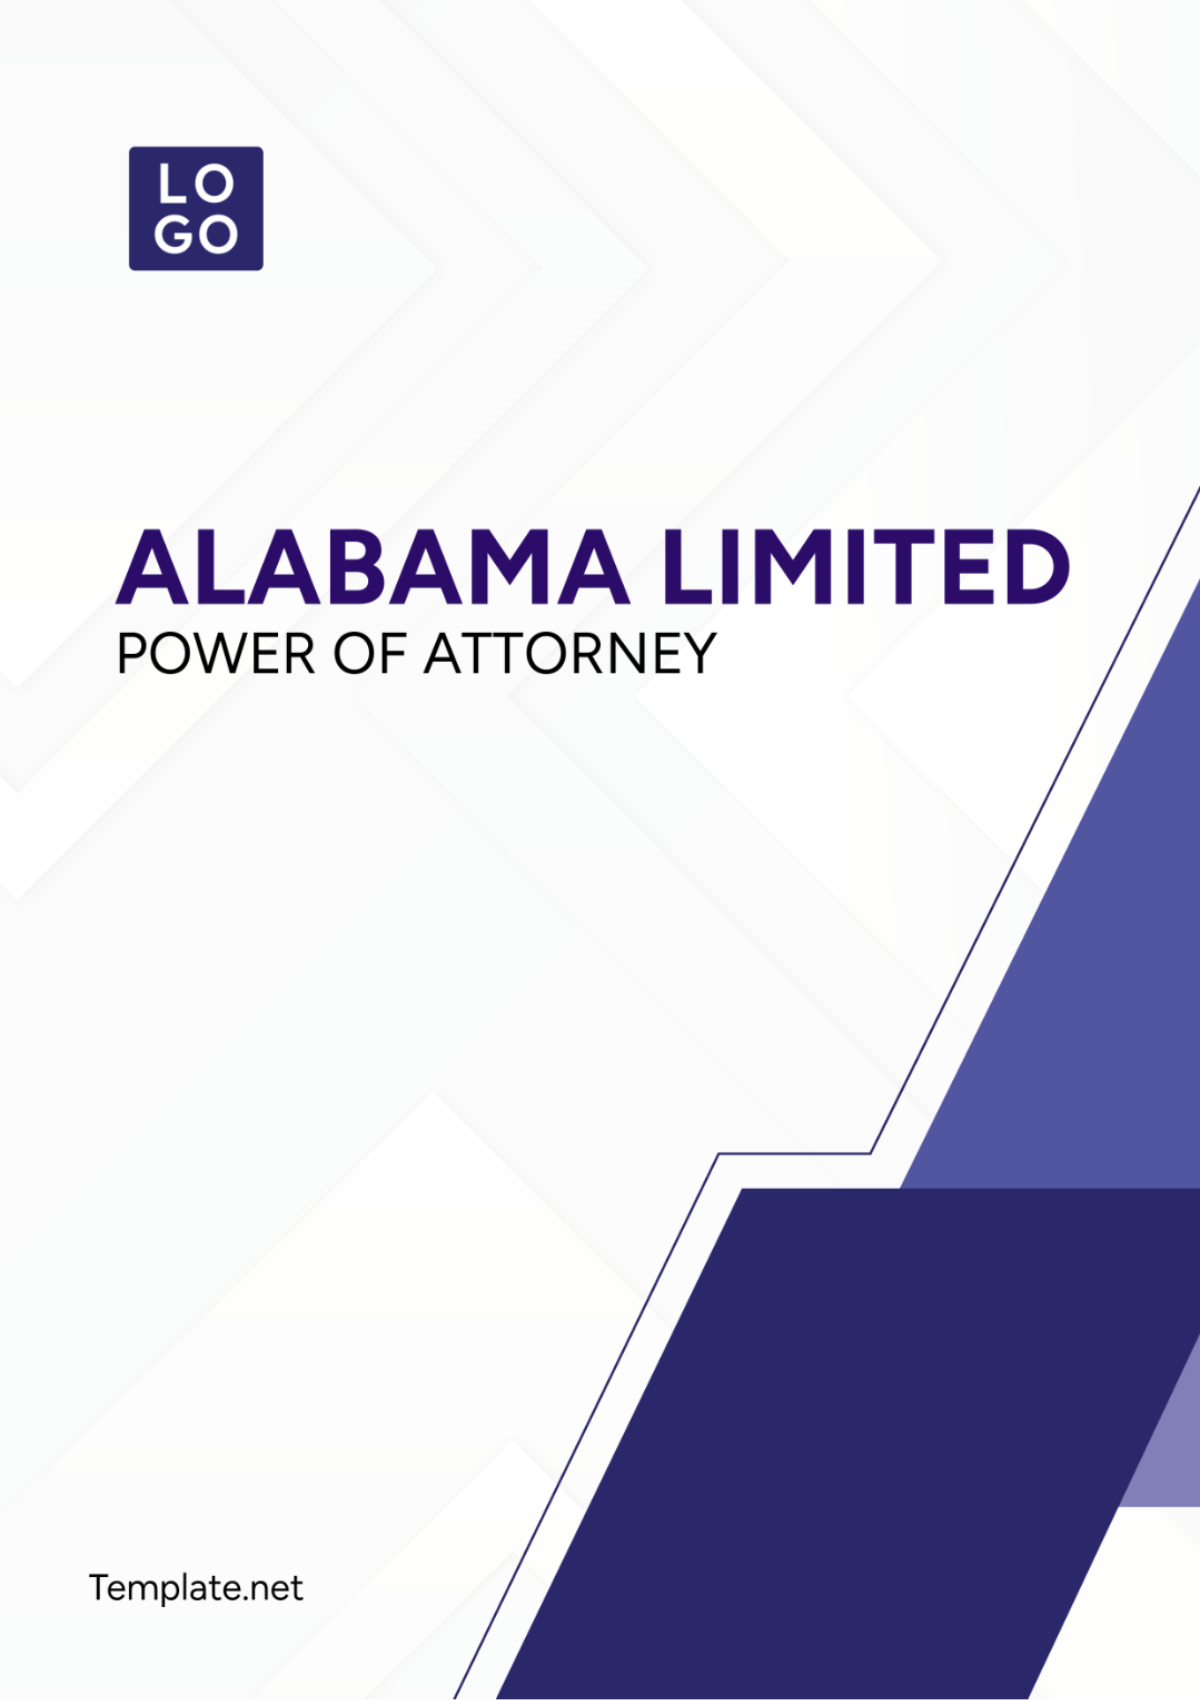 Alabama Limited Power of Attorney Template